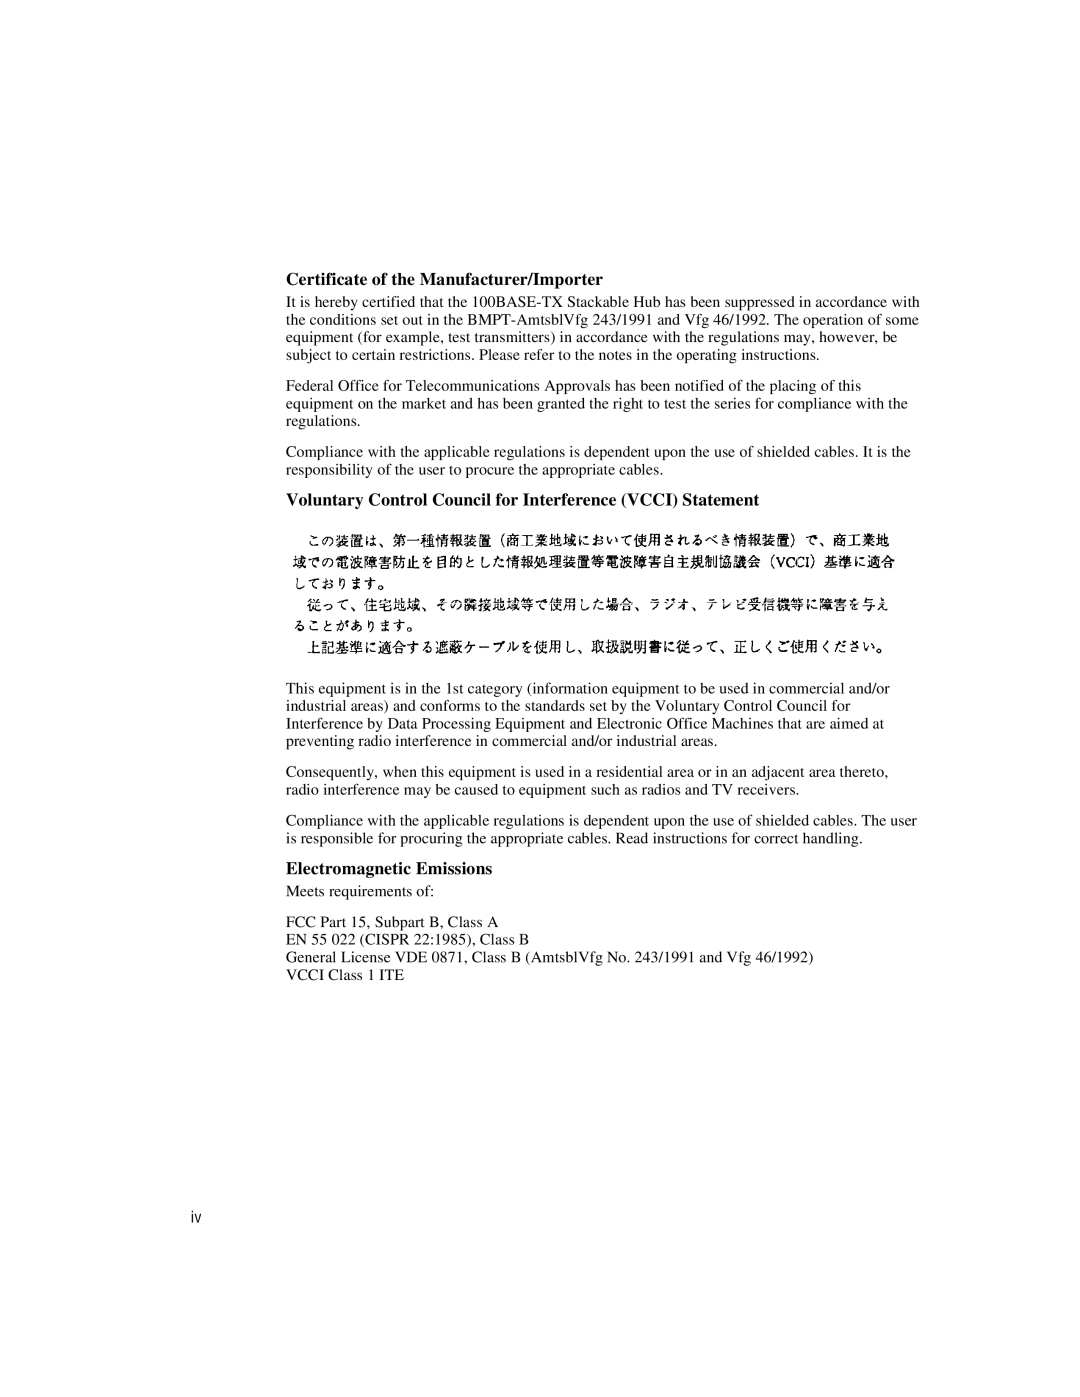 Intel 100BASE-TX manual Certificate of the Manufacturer/Importer, Electromagnetic Emissions 